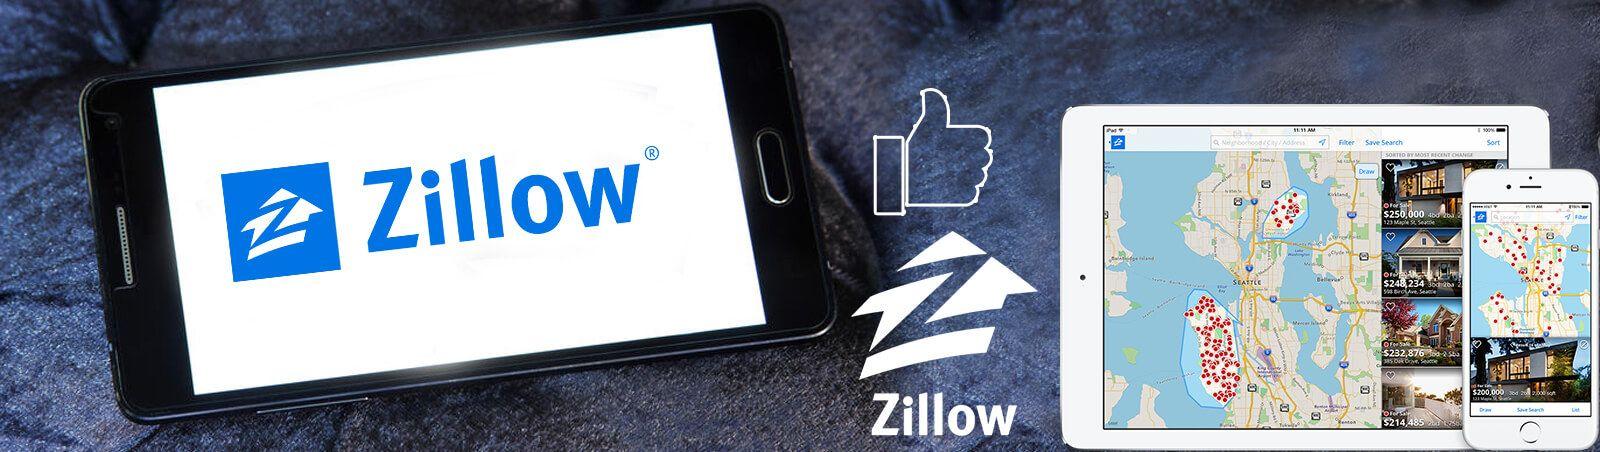 Zillow iPhone Logo - How to Develop a Real Estate App like Zillow?